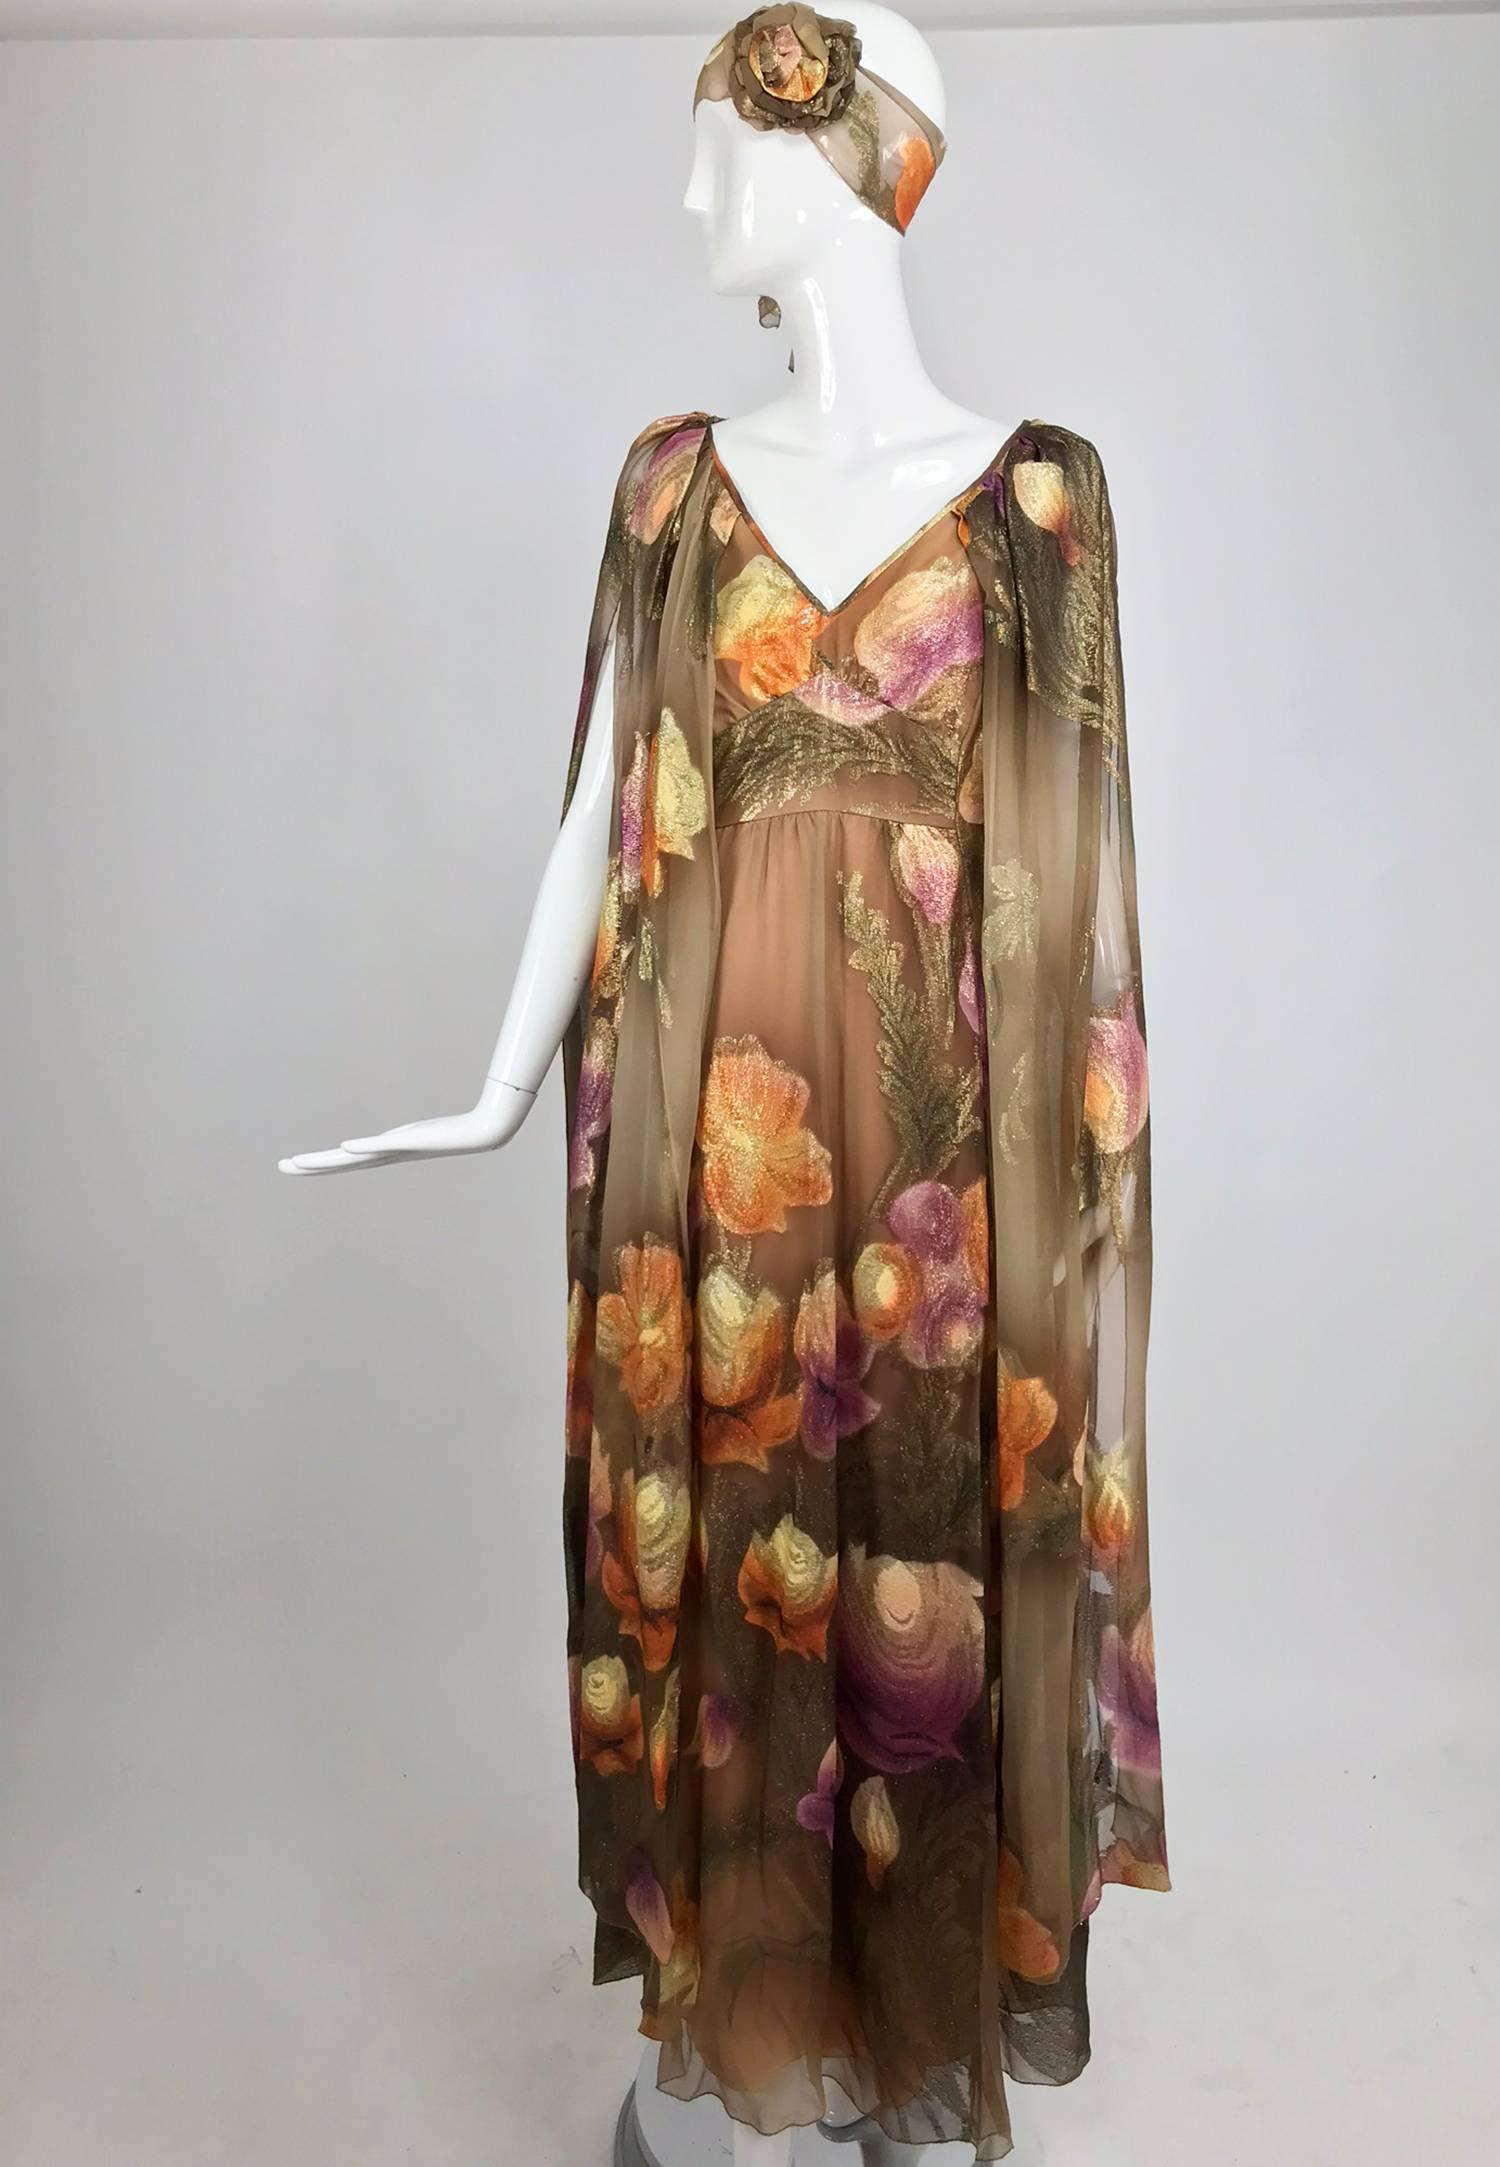 Lilija Nicis hand painted metallic silk chiffon gown from the 1960s. Lilija Nicis made specialty clothing for wealthy clients in the 1950s and 60's at her shop in Rockville Centre New York, she was listed as a couturier and the quality of her